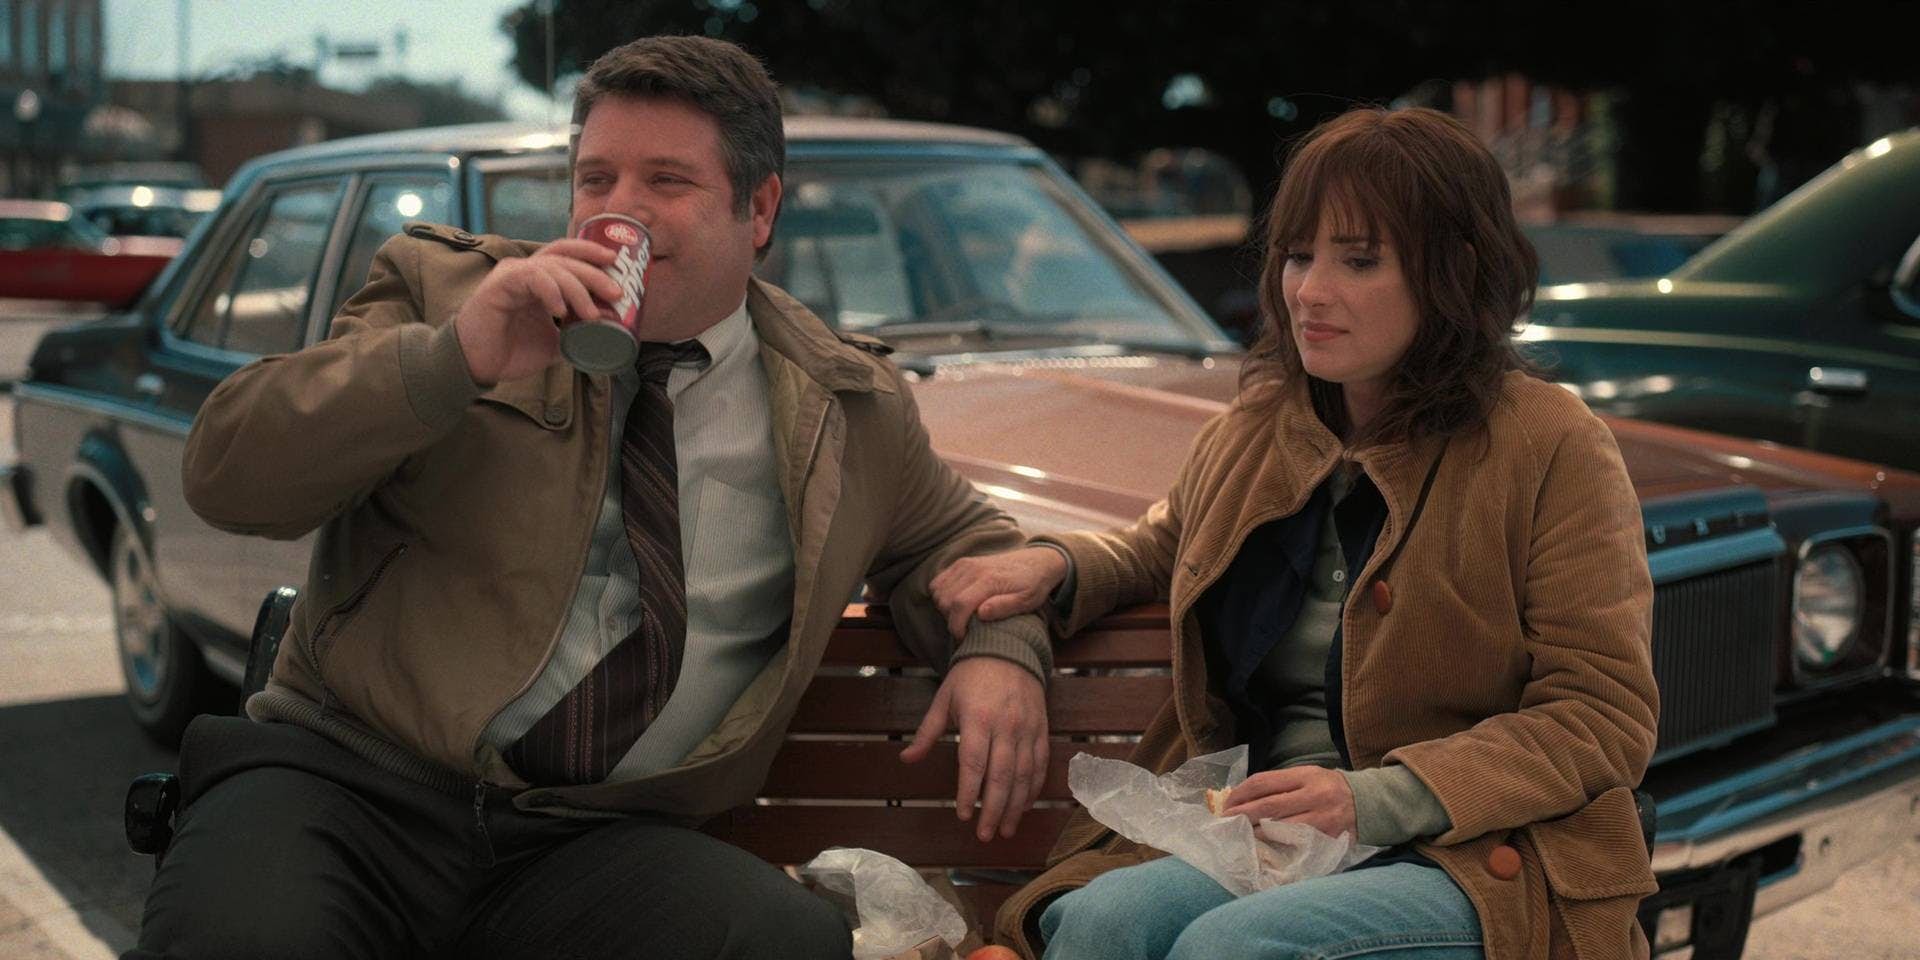 Bob from "Stranger Things" drinking Dr. Pepper on a bench next to Joyce Byers